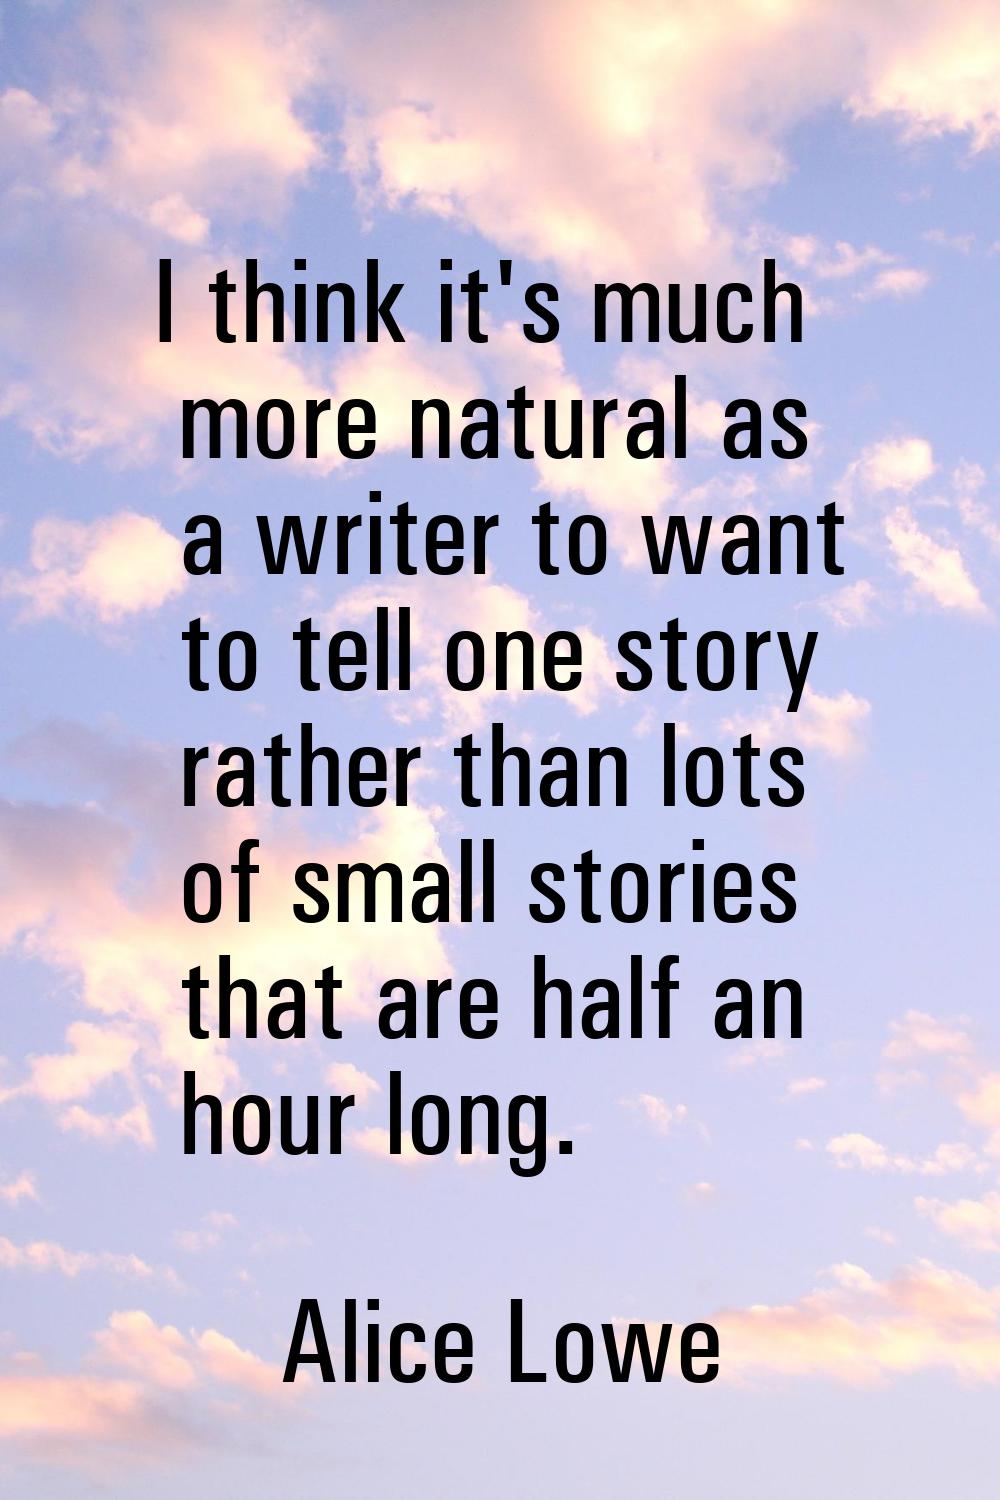 I think it's much more natural as a writer to want to tell one story rather than lots of small stor